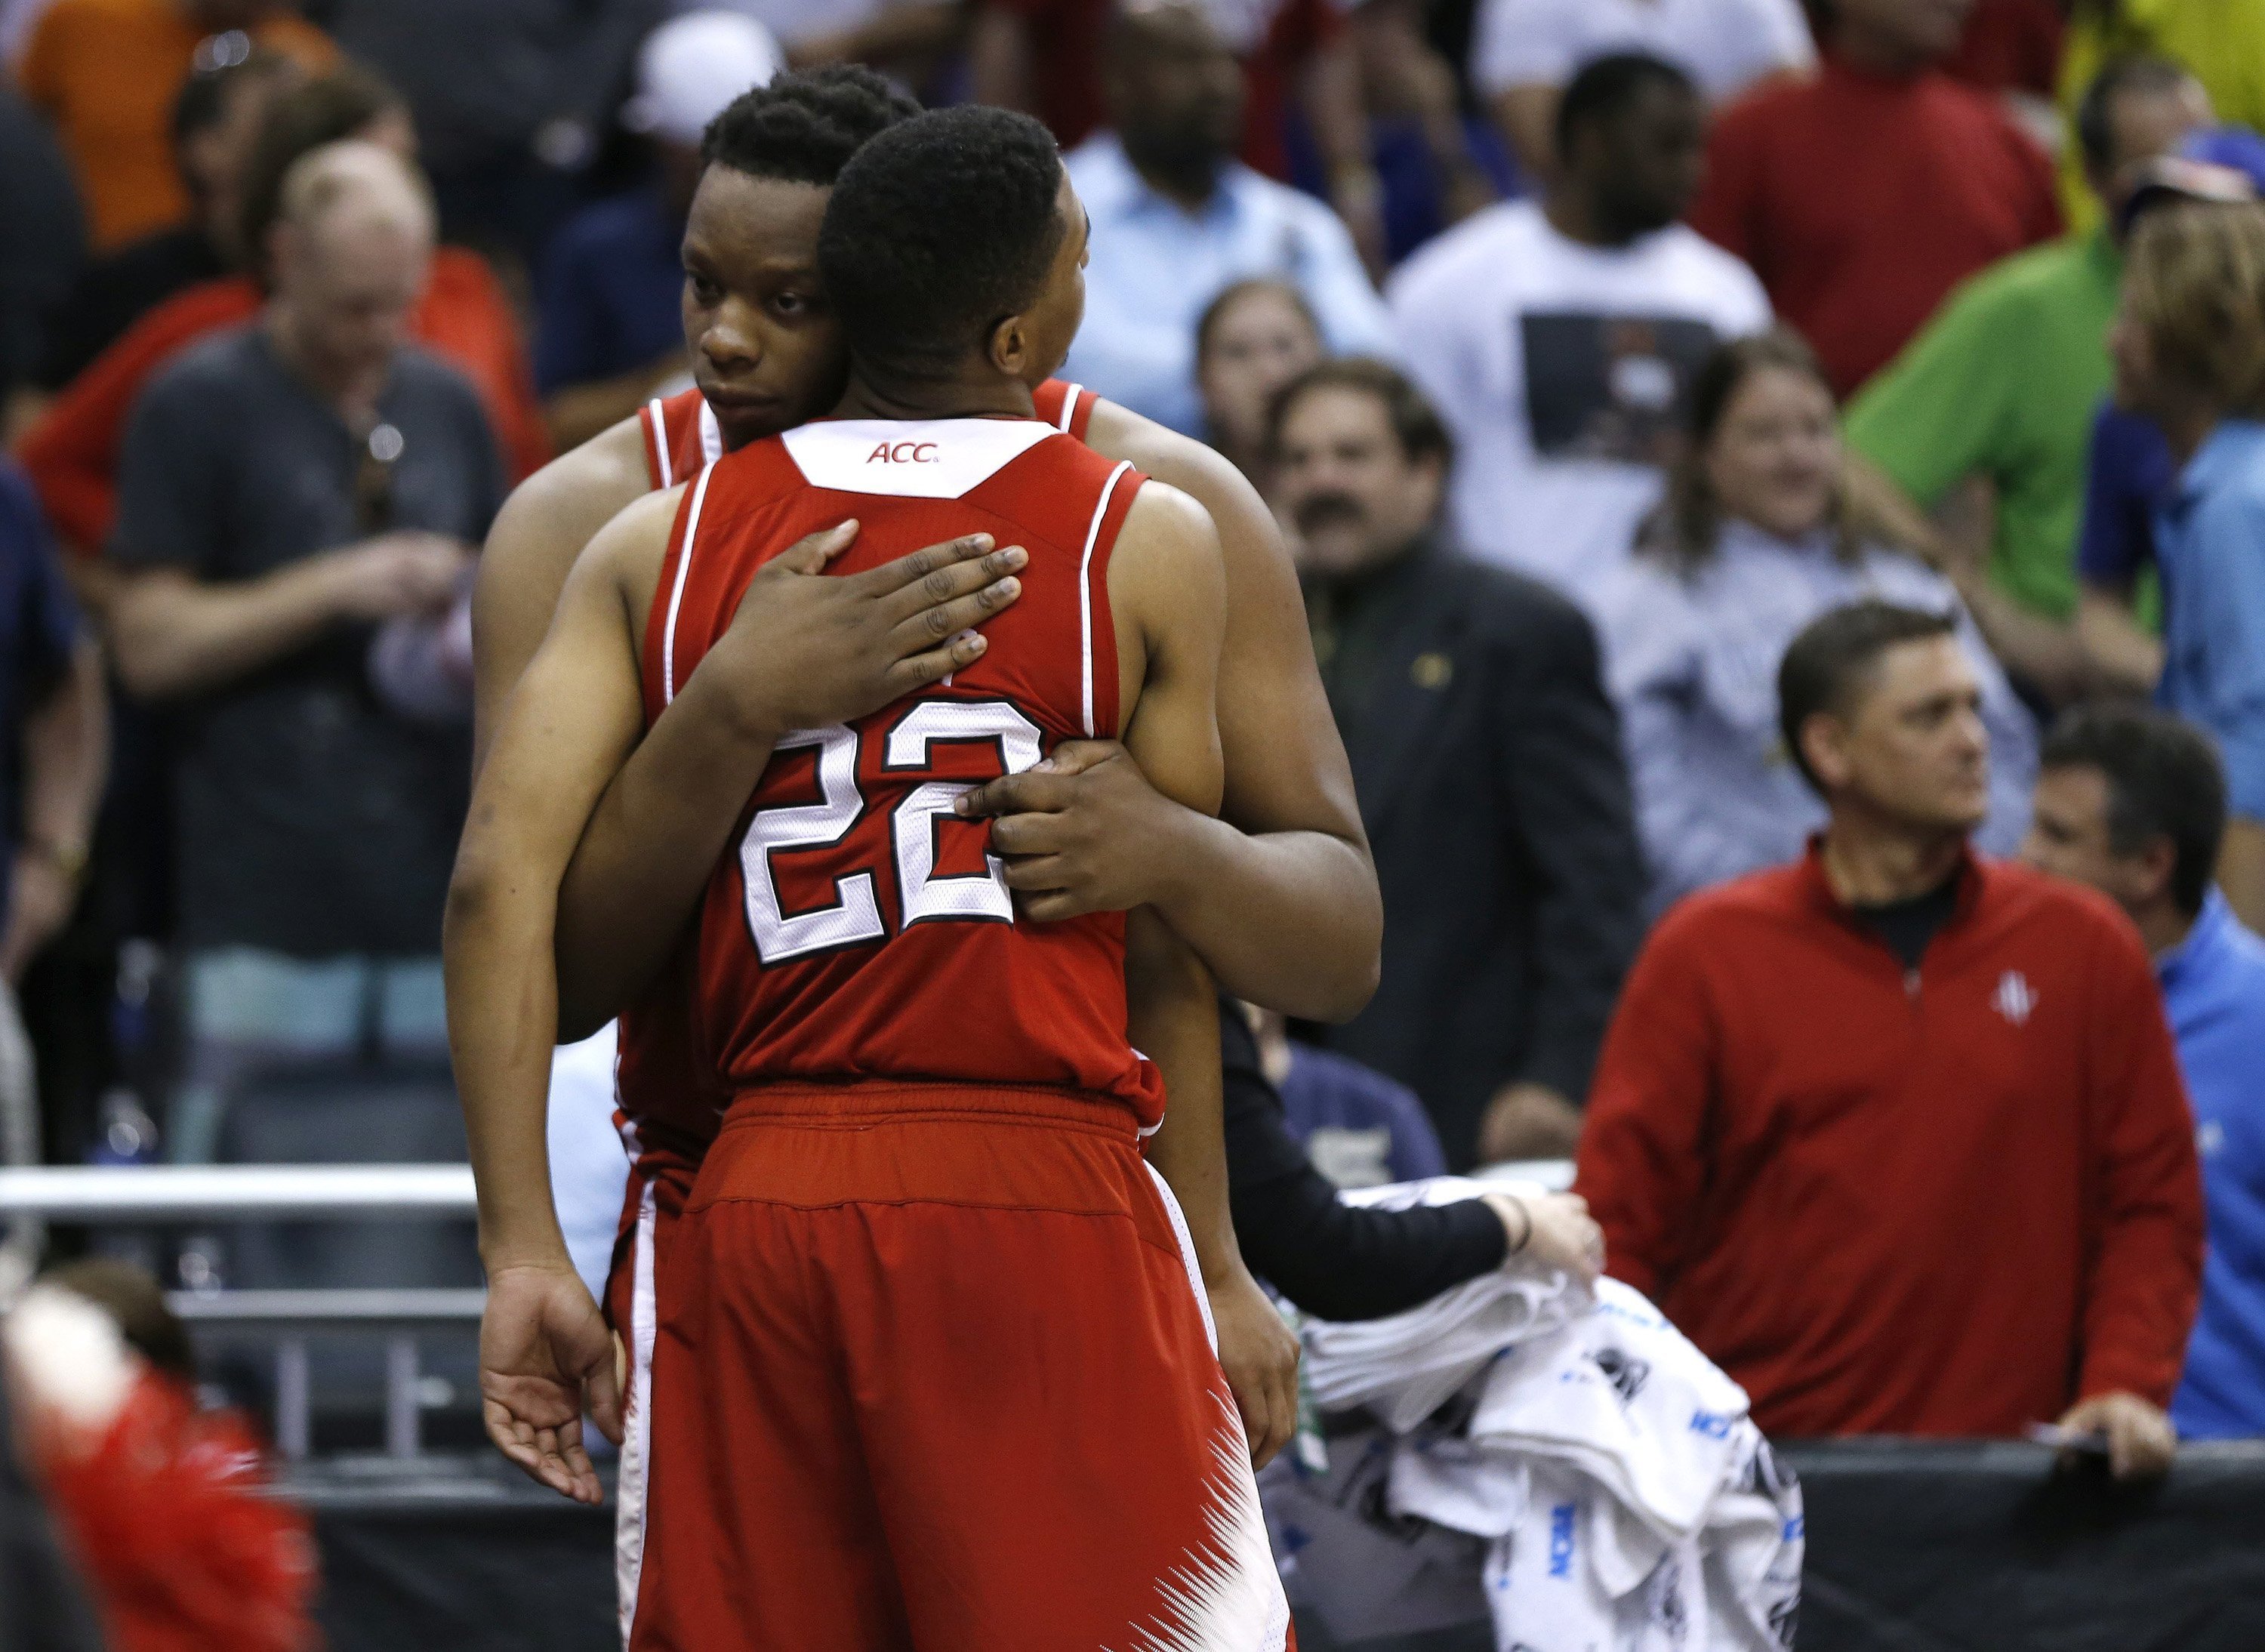 N.C. State Wolfpack's Beejay Anya hugs Ralston Turner after time expired during Saint Louis Billkens' 83-80 overtime victory in the second round of the NCAA Tournament at the Amway Center in Orlando, Fla., March 20, 2014.